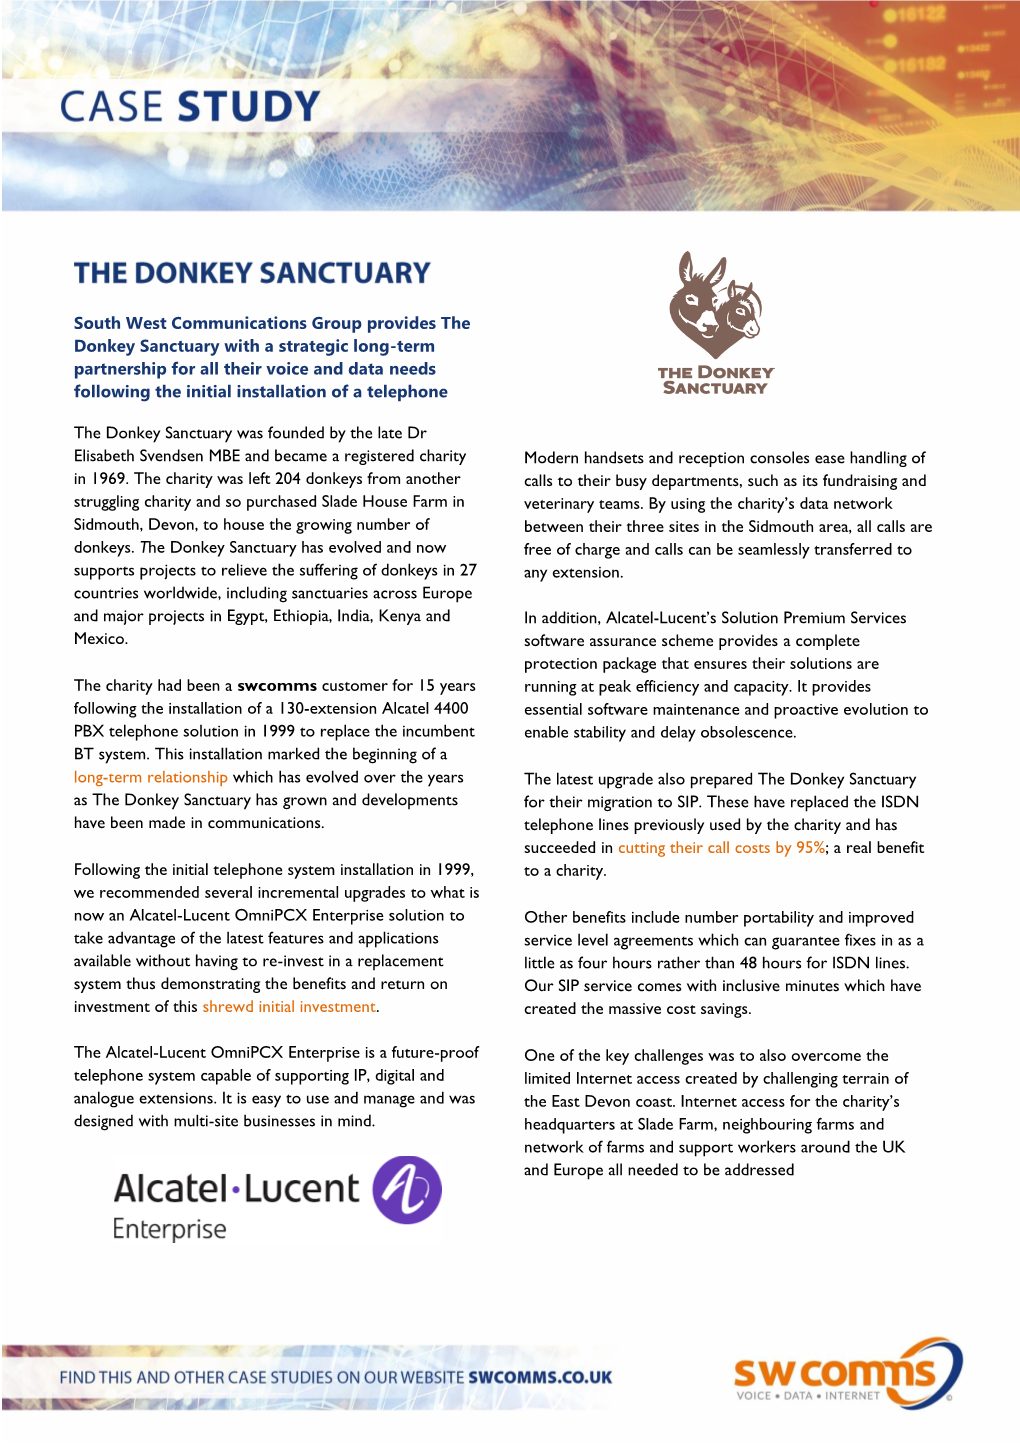 The Donkey Sanctuary with a Strategic Long-Term Partnership for All Their Voice and Data Needs Following the Initial Installation of a Telephone System in 1999